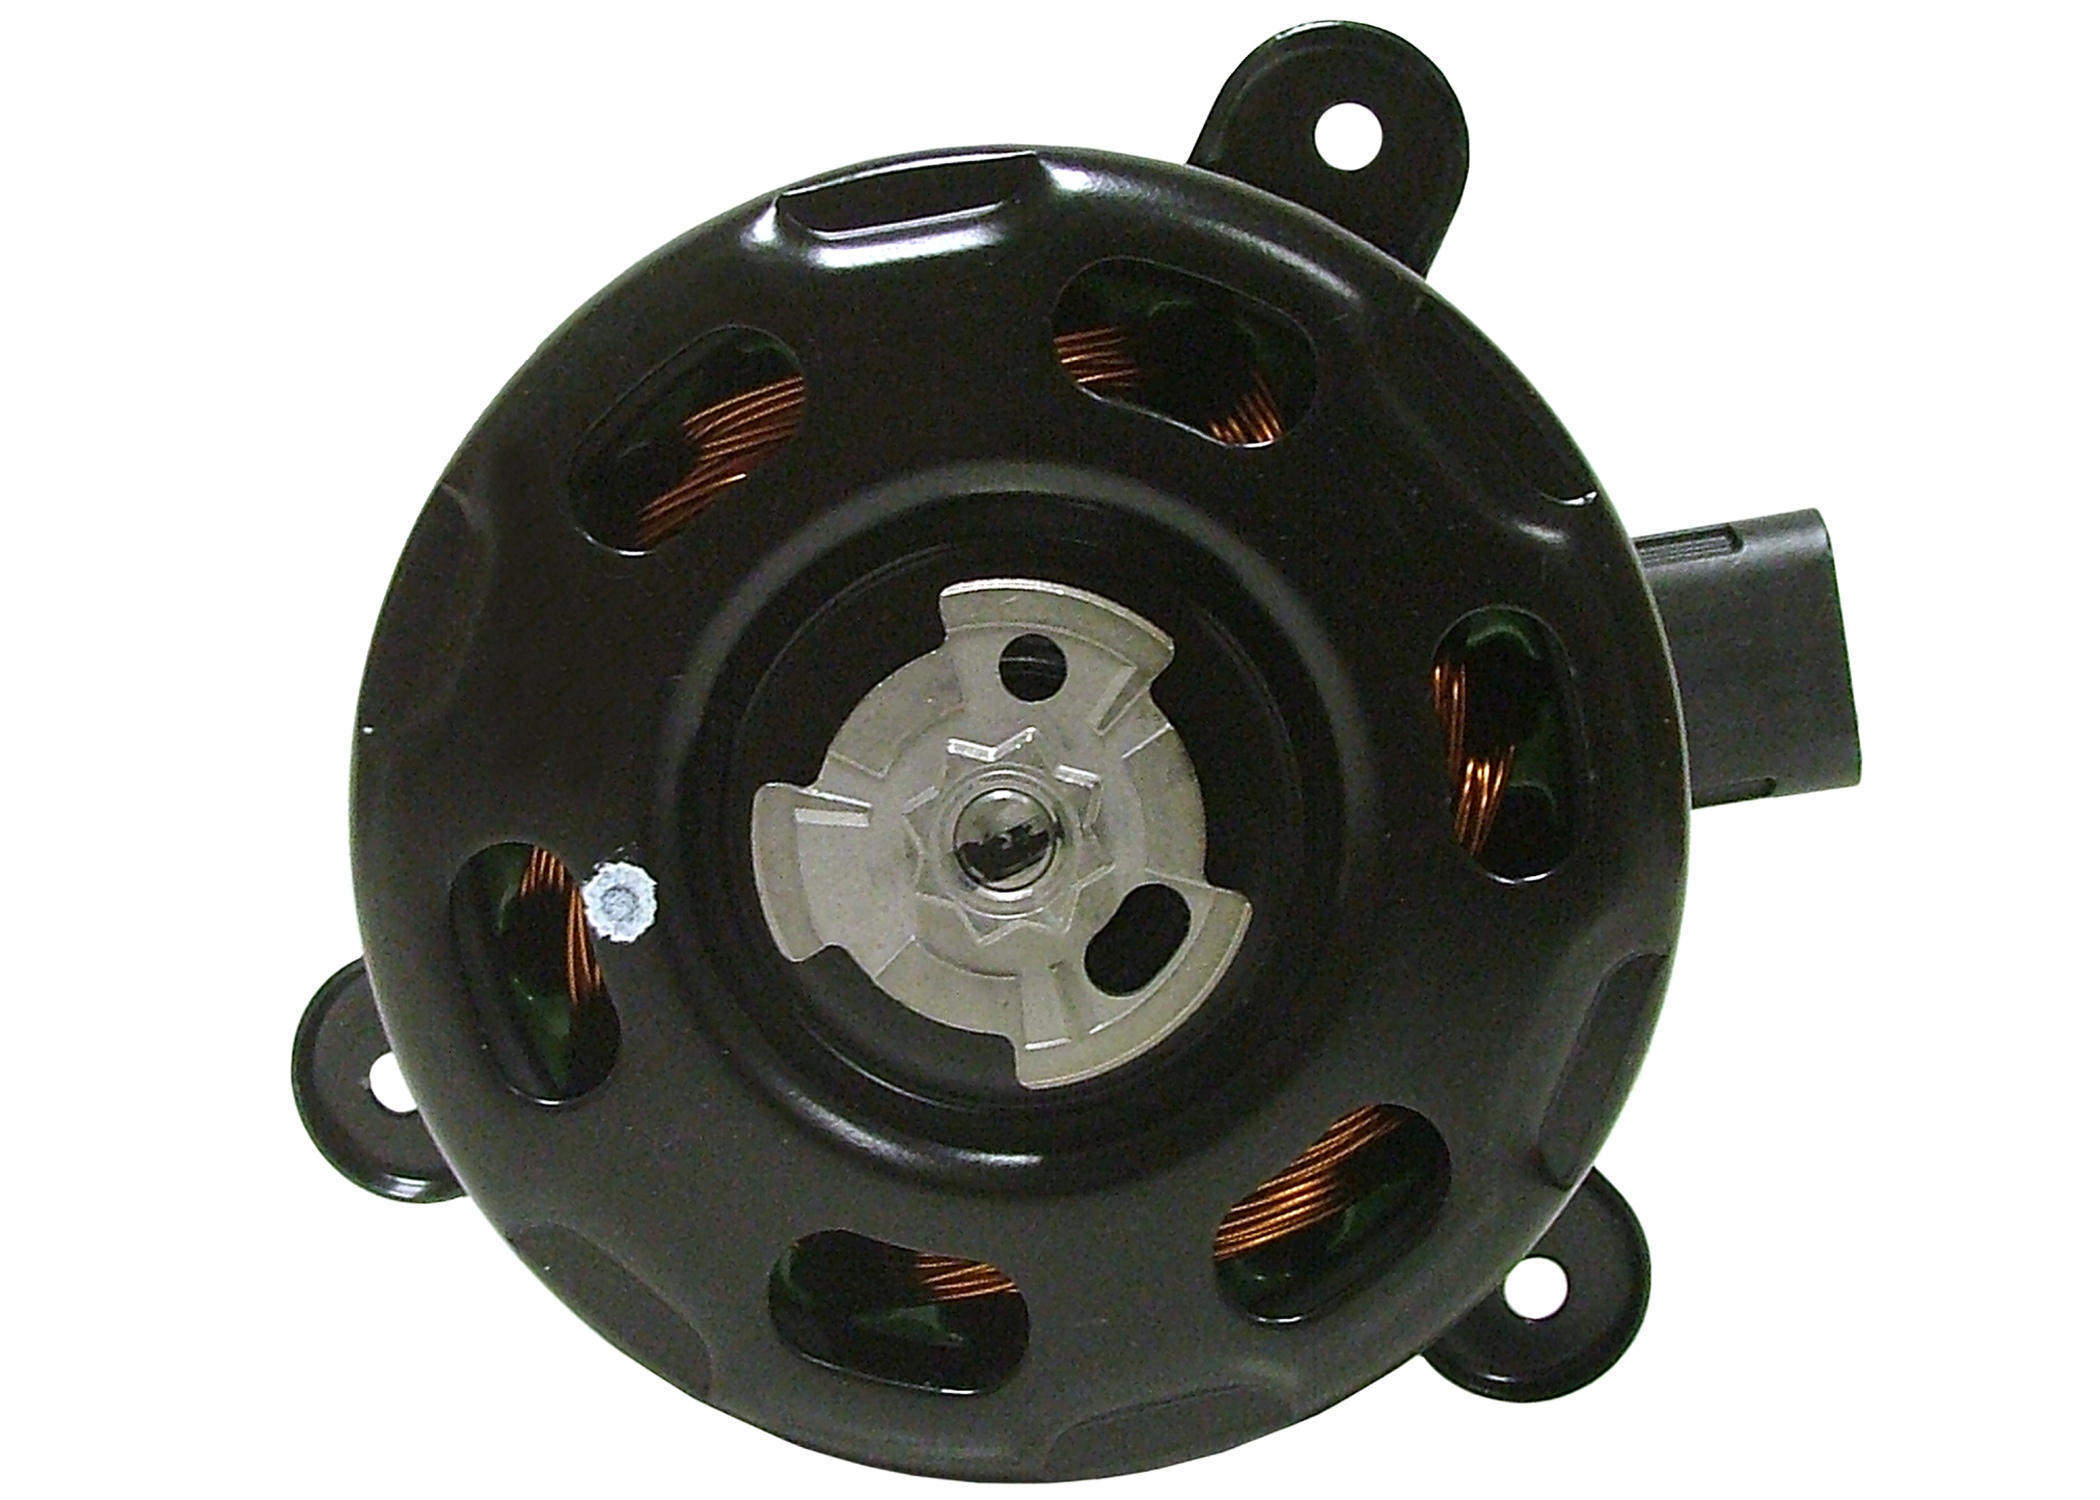 GM GENUINE PARTS CANADA - Engine Cooling Fan Motor Kit - GMC 15-80640